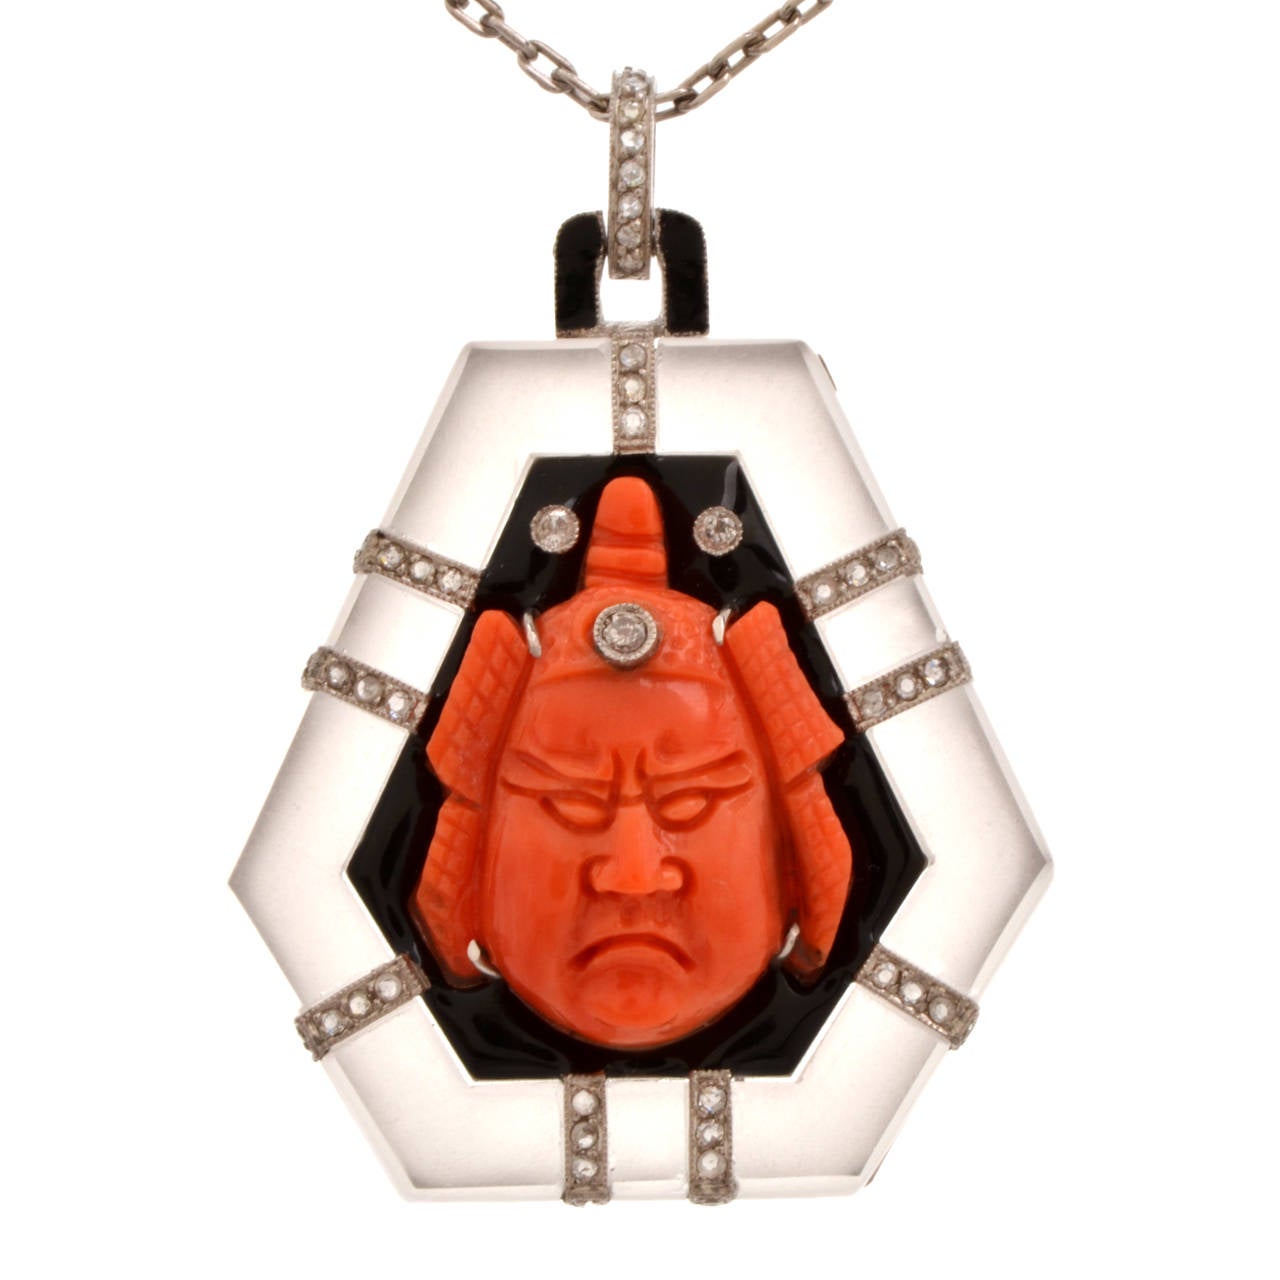 This Art Deco pendant necklace of artistic craftsmanship consists of a coral, onyx and diamond pendant and a platinum supporting chain. The pendant of hexagonal design depicts the artistically carved cameo portrait of a  Japanese warrior Samurai